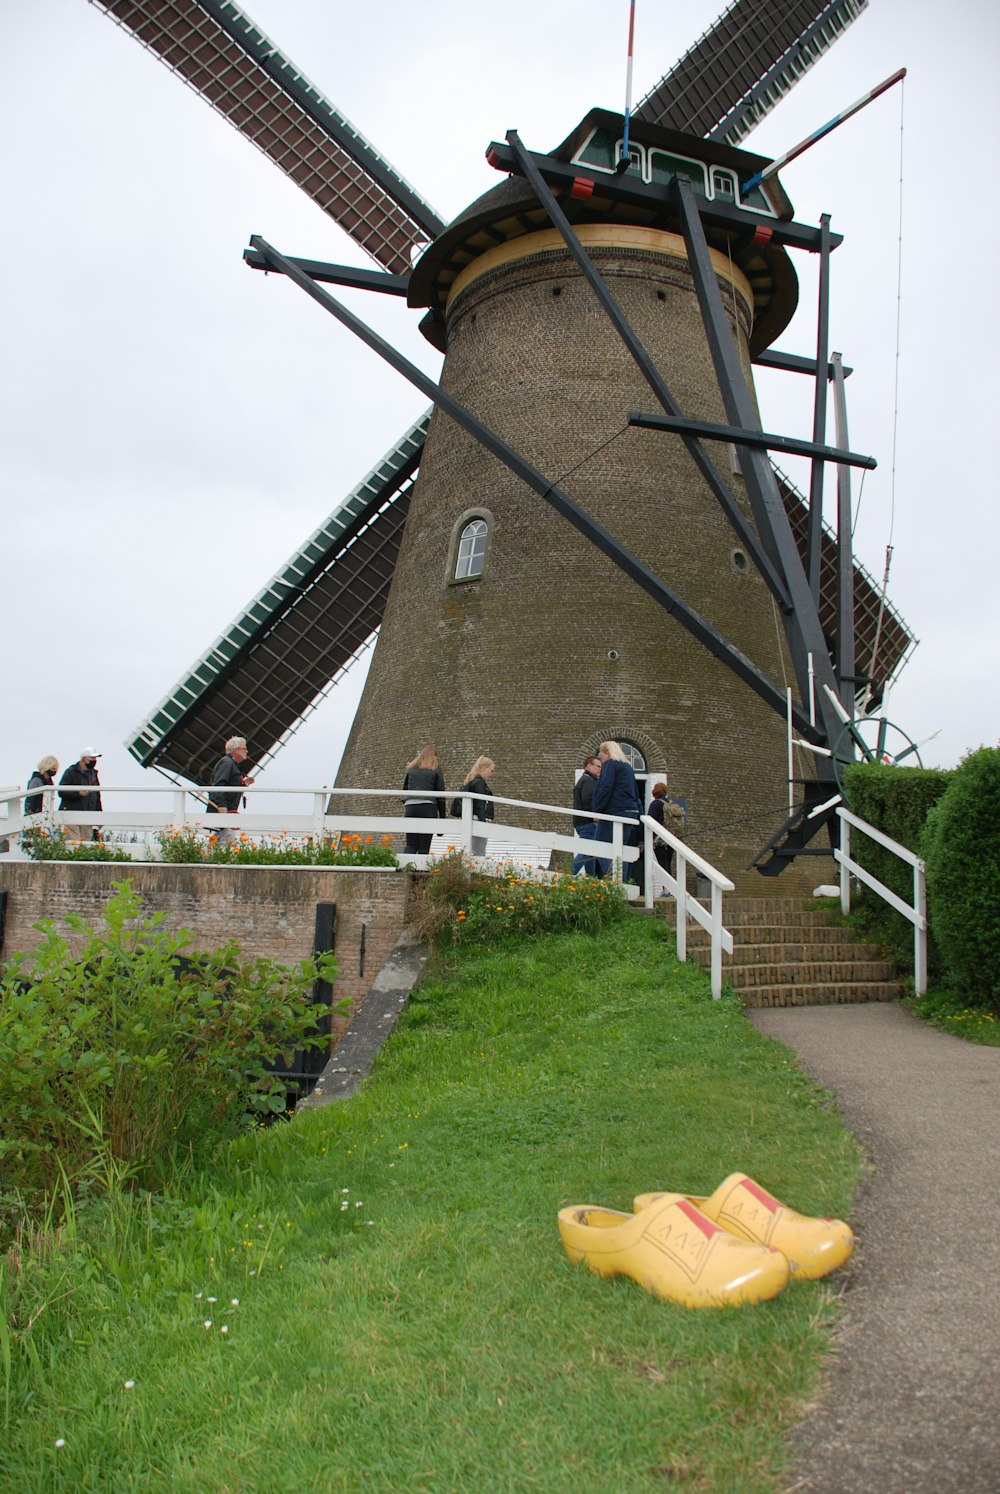 a yellow rubber shoe laying on the ground in front of a windmill